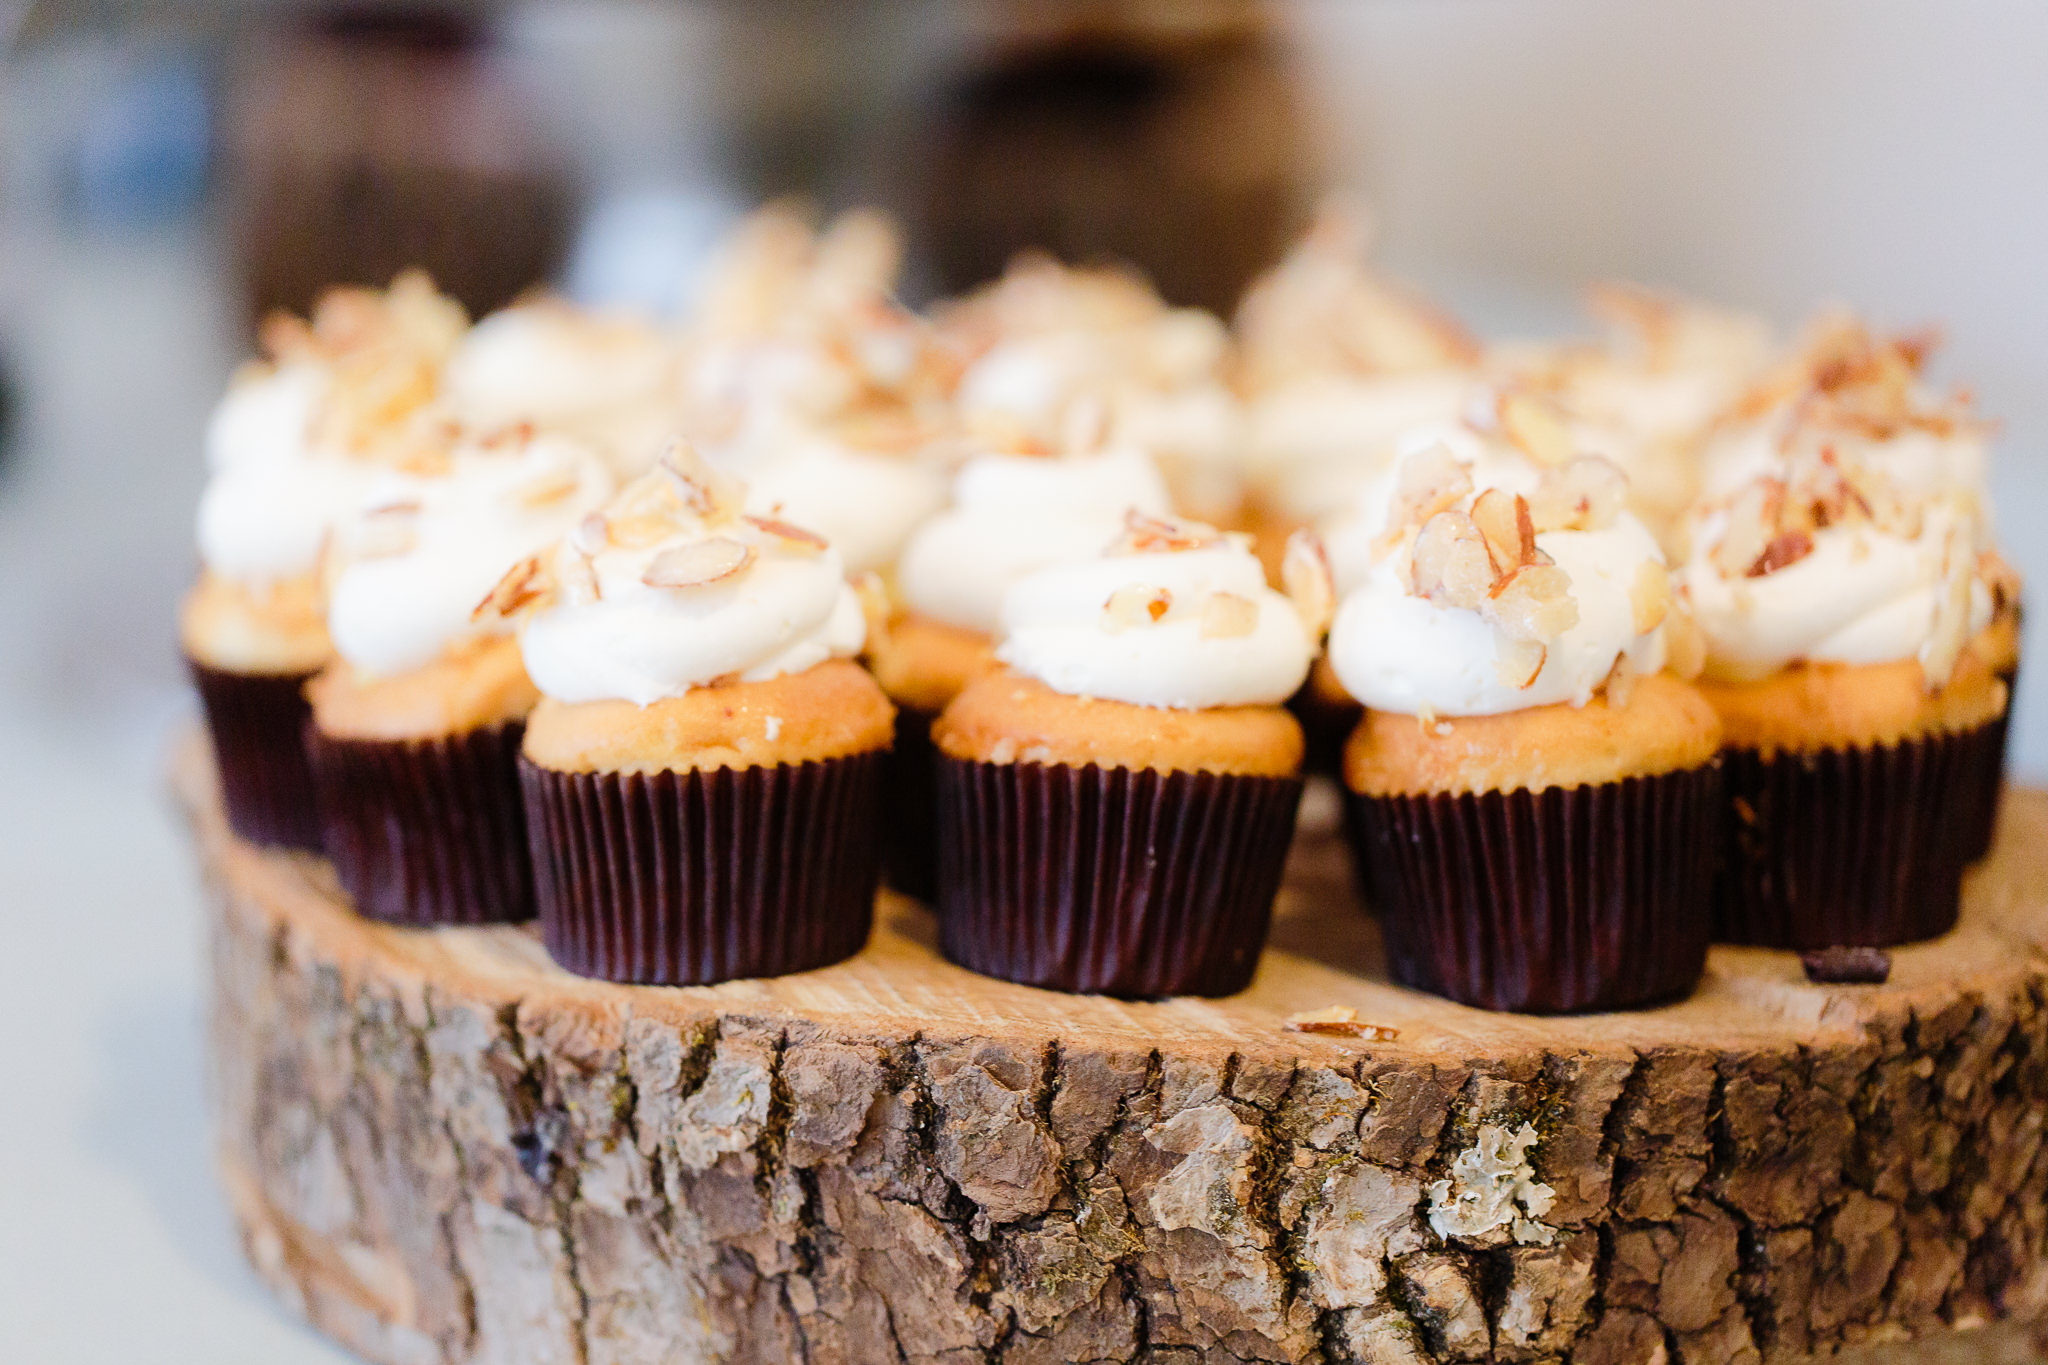 Small almond cupcakes by Bella Christie & Lil Z's Sweet Boutique sit atop a rustic cake tray